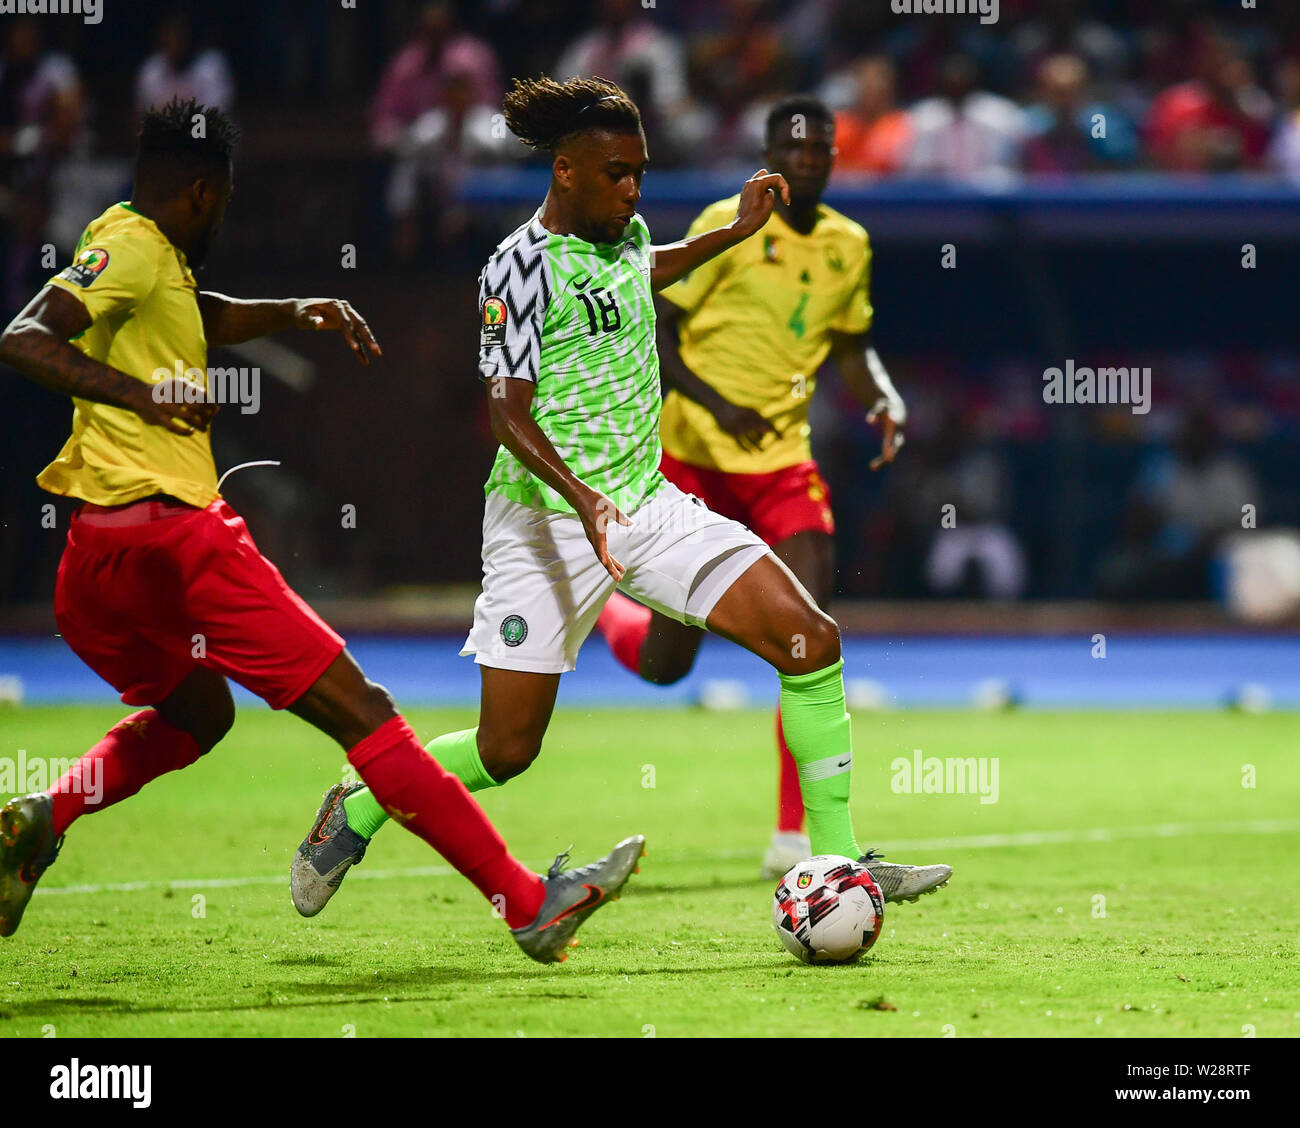 Alexandria, Egypt. 6th July, 2019. Alex Iwobi (C) of Nigeria comeptes during the round of 16 match between Nigeria and Cameroon at the 2019 African Cup of Nations in Alexandria, Egypt, July 6, 2019. Credit: Wu Huiwo/Xinhua/Alamy Live News Stock Photo